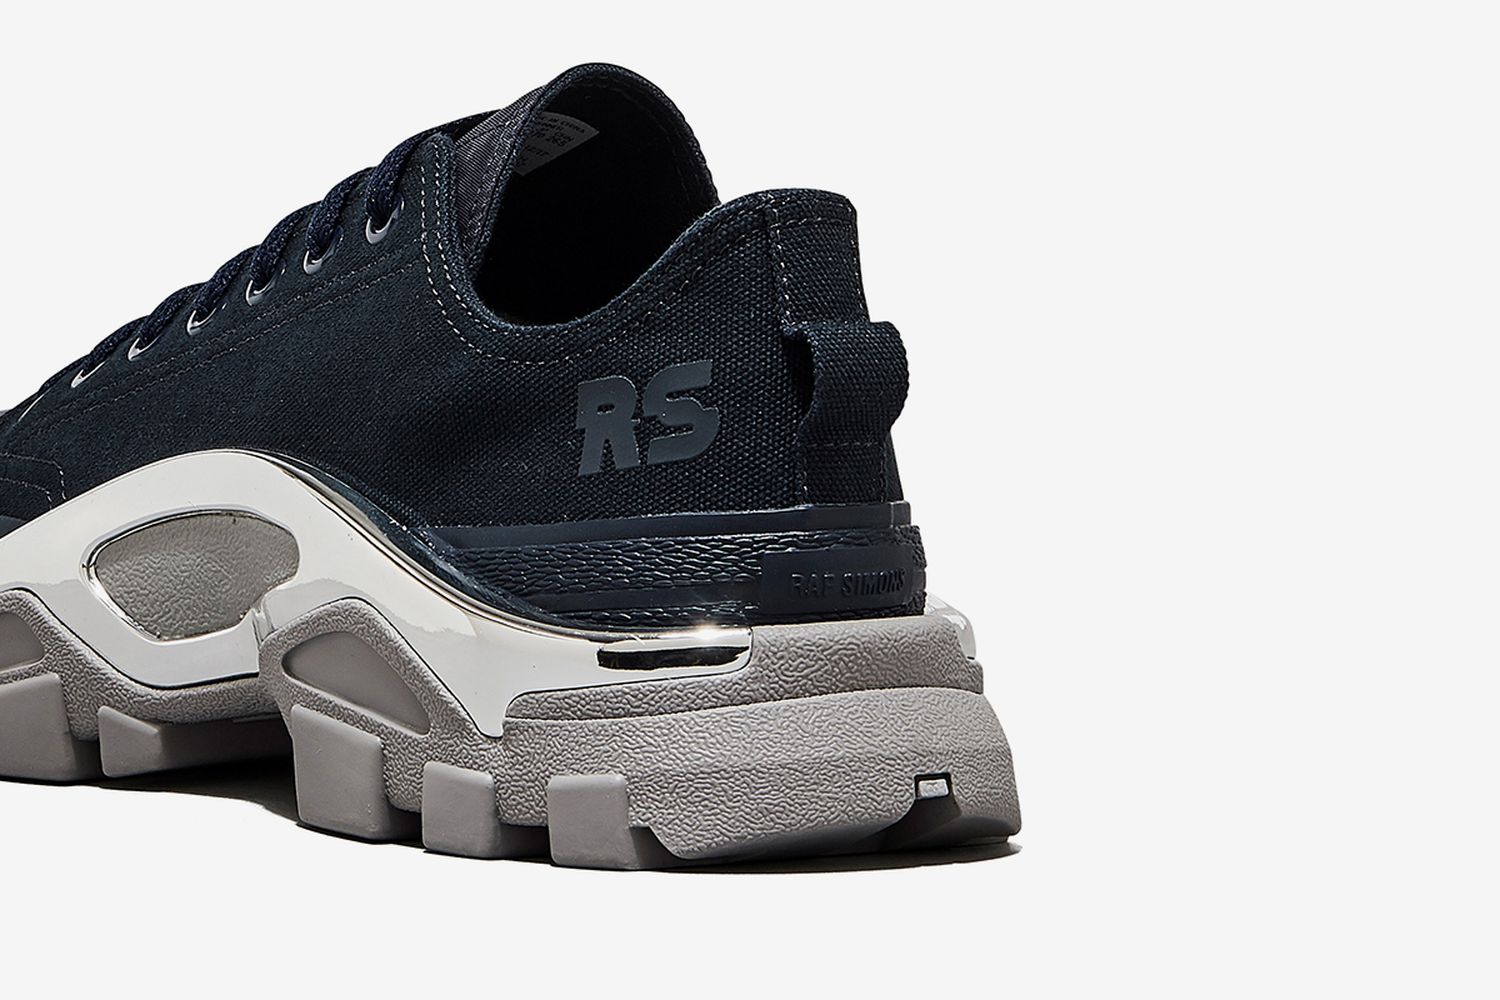 adidas by Raf Simons RS Detroit Runner: Release, Price, & Info